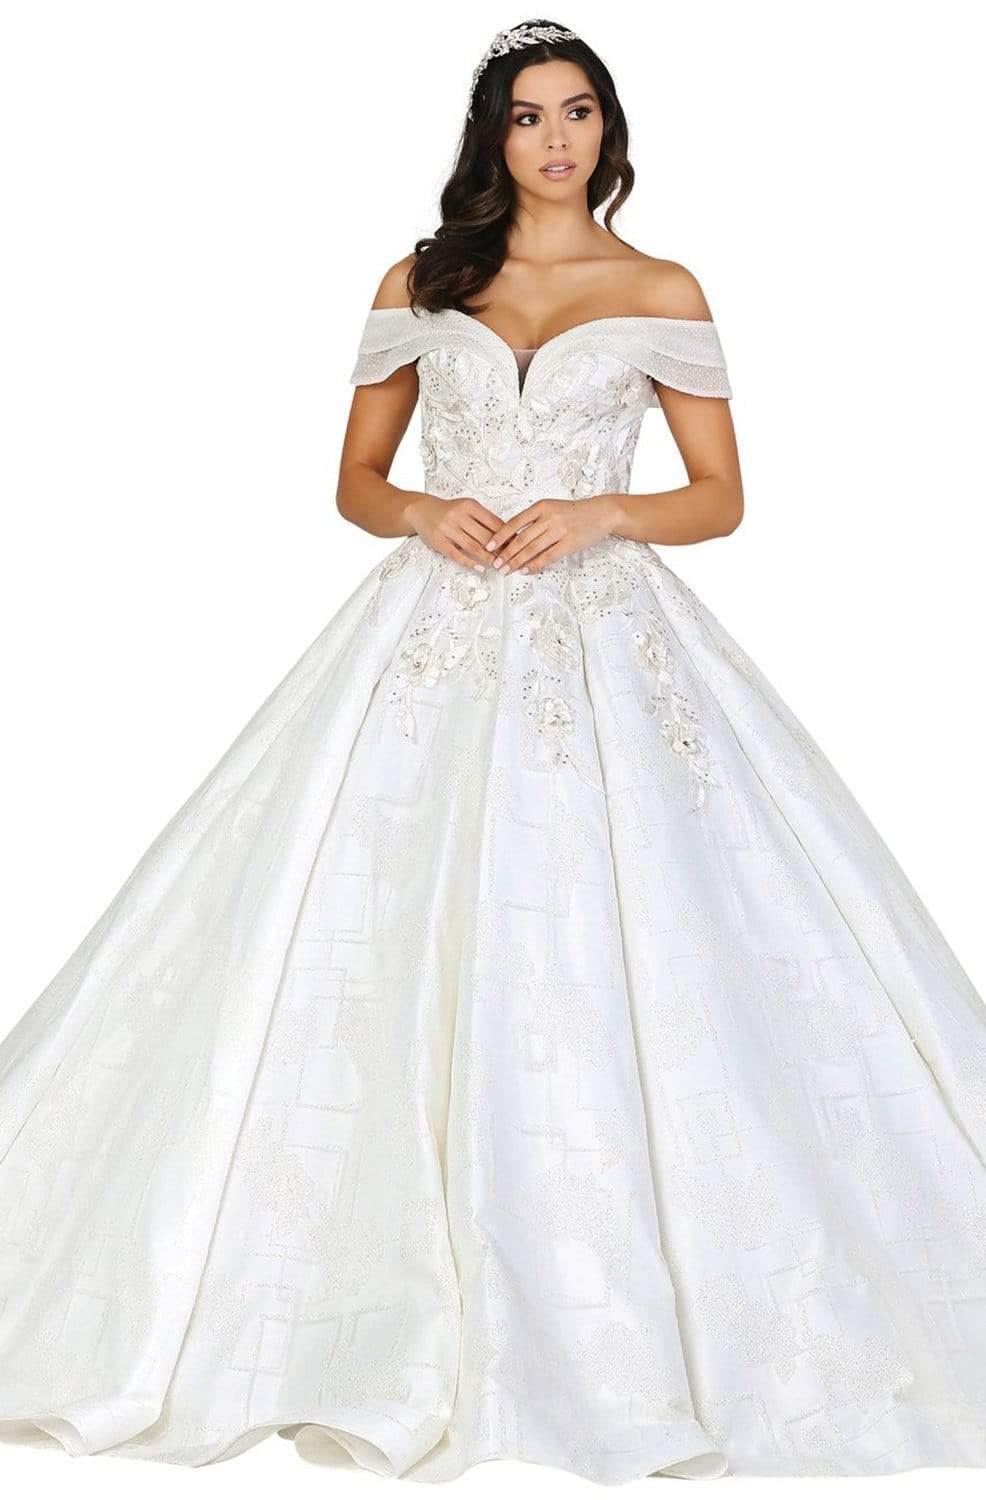 Image of Dancing Queen - 153 Embellished Off-Shoulder Ballgown With Train